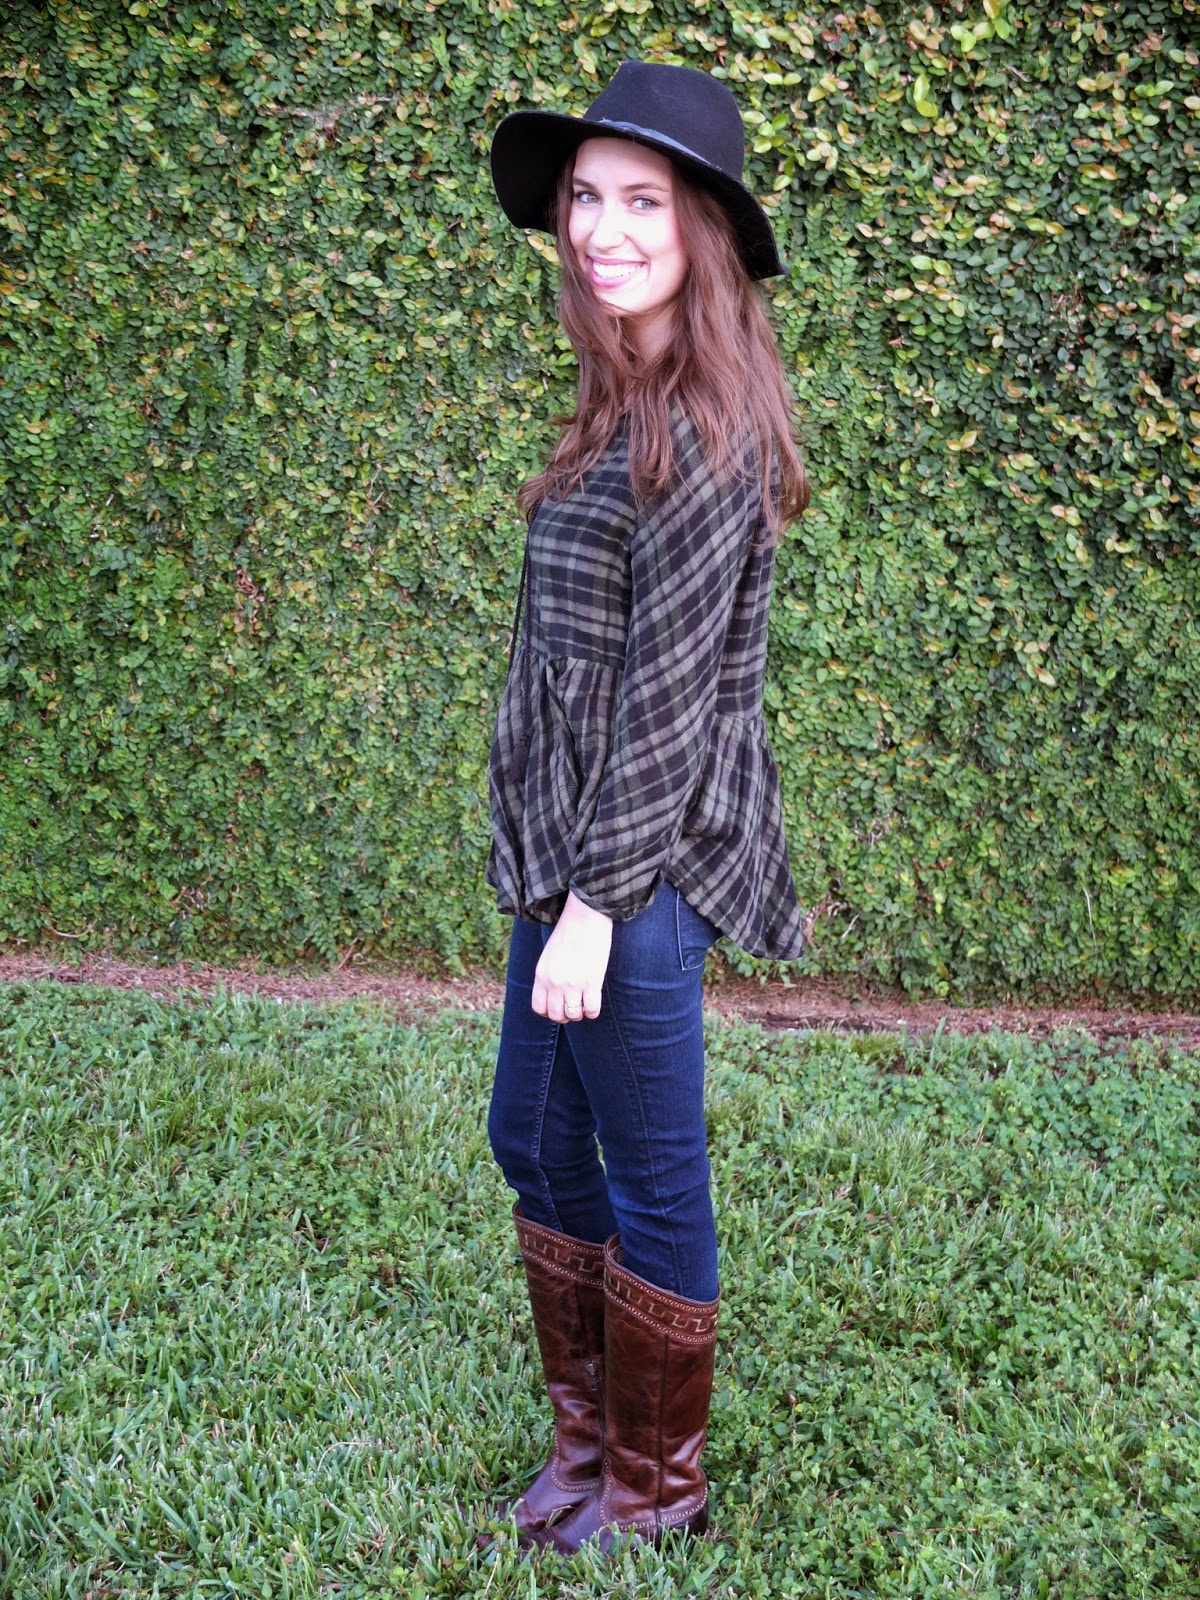 Anthropologie Plaid Peasant Top, Anthropologie Green Top, Anthropologie Green Plaid Top, Trendy in Texas, Fall Fashion, Trendy in Texas Fall Style, Black Floppy Felt Hat, Black Floppy Hat, Ariat Boots, Western Boots, Cavender's, Ariat Cavander's Boots, Houston Cowboy Boots,  Ariat Sahara Boots